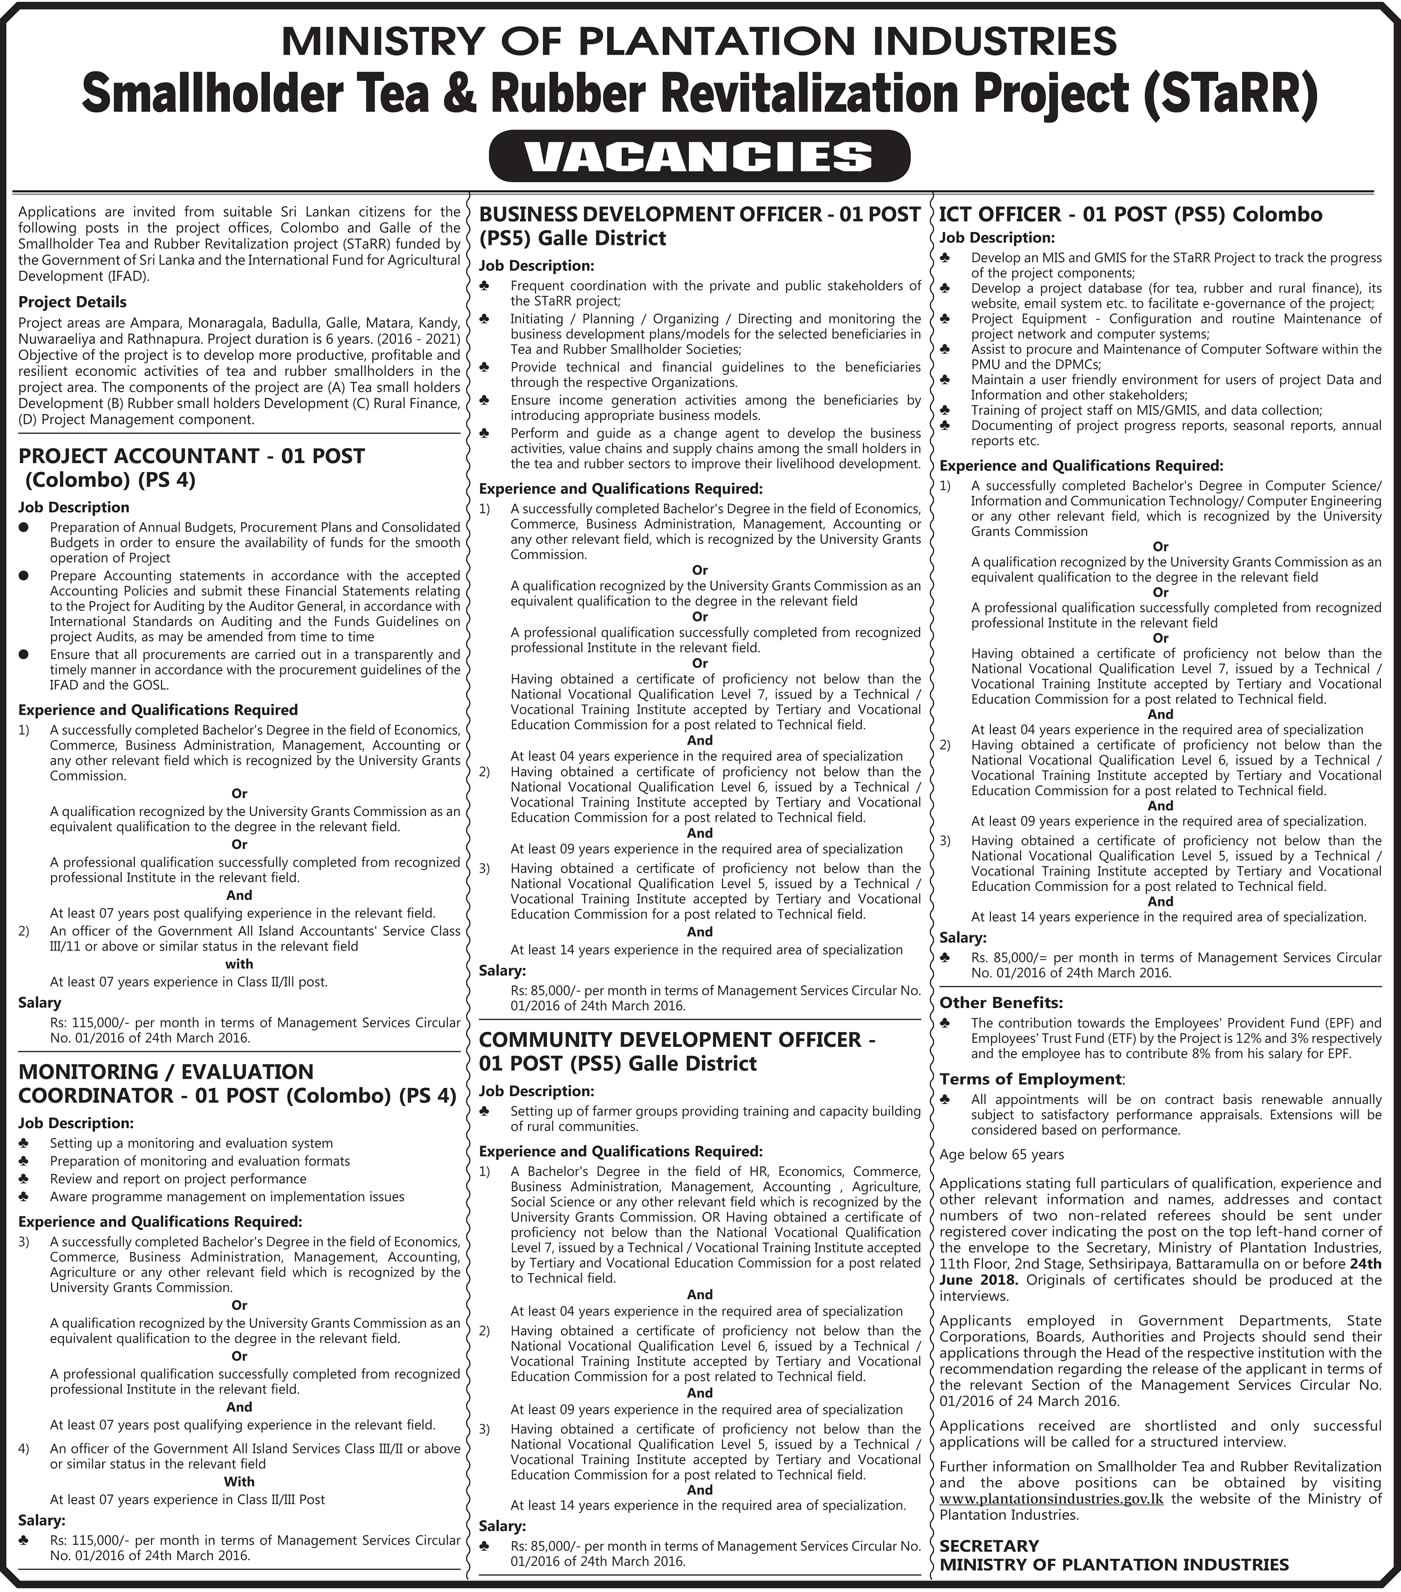 Ministry of Plantation Industries Project Accountant, Monitoring/Evaluation Coordinator, Business Development Officer, Community Development Officer, ICT Officer Jobs Vacancies